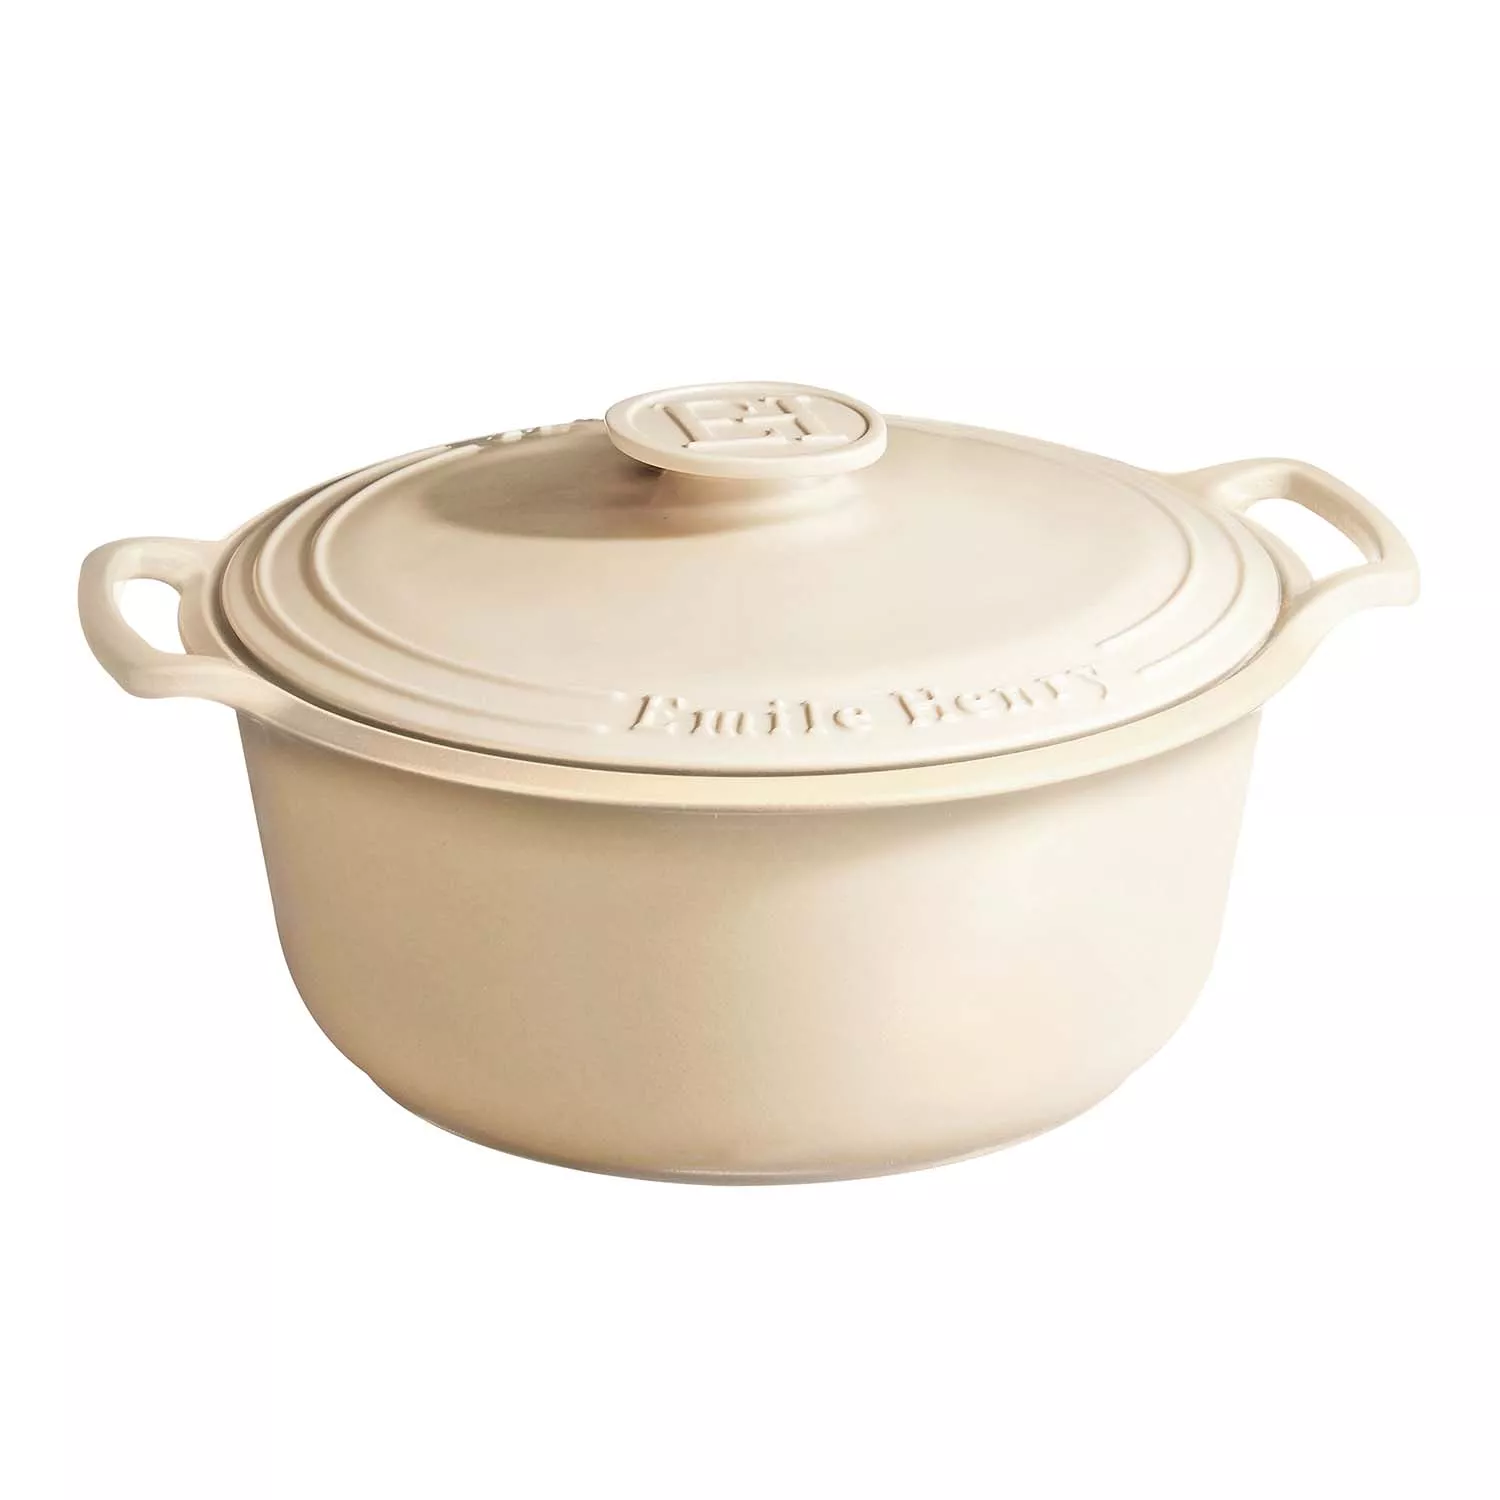 Meet the NEW Emile Henry Sublime French Ceramic Dutch Oven